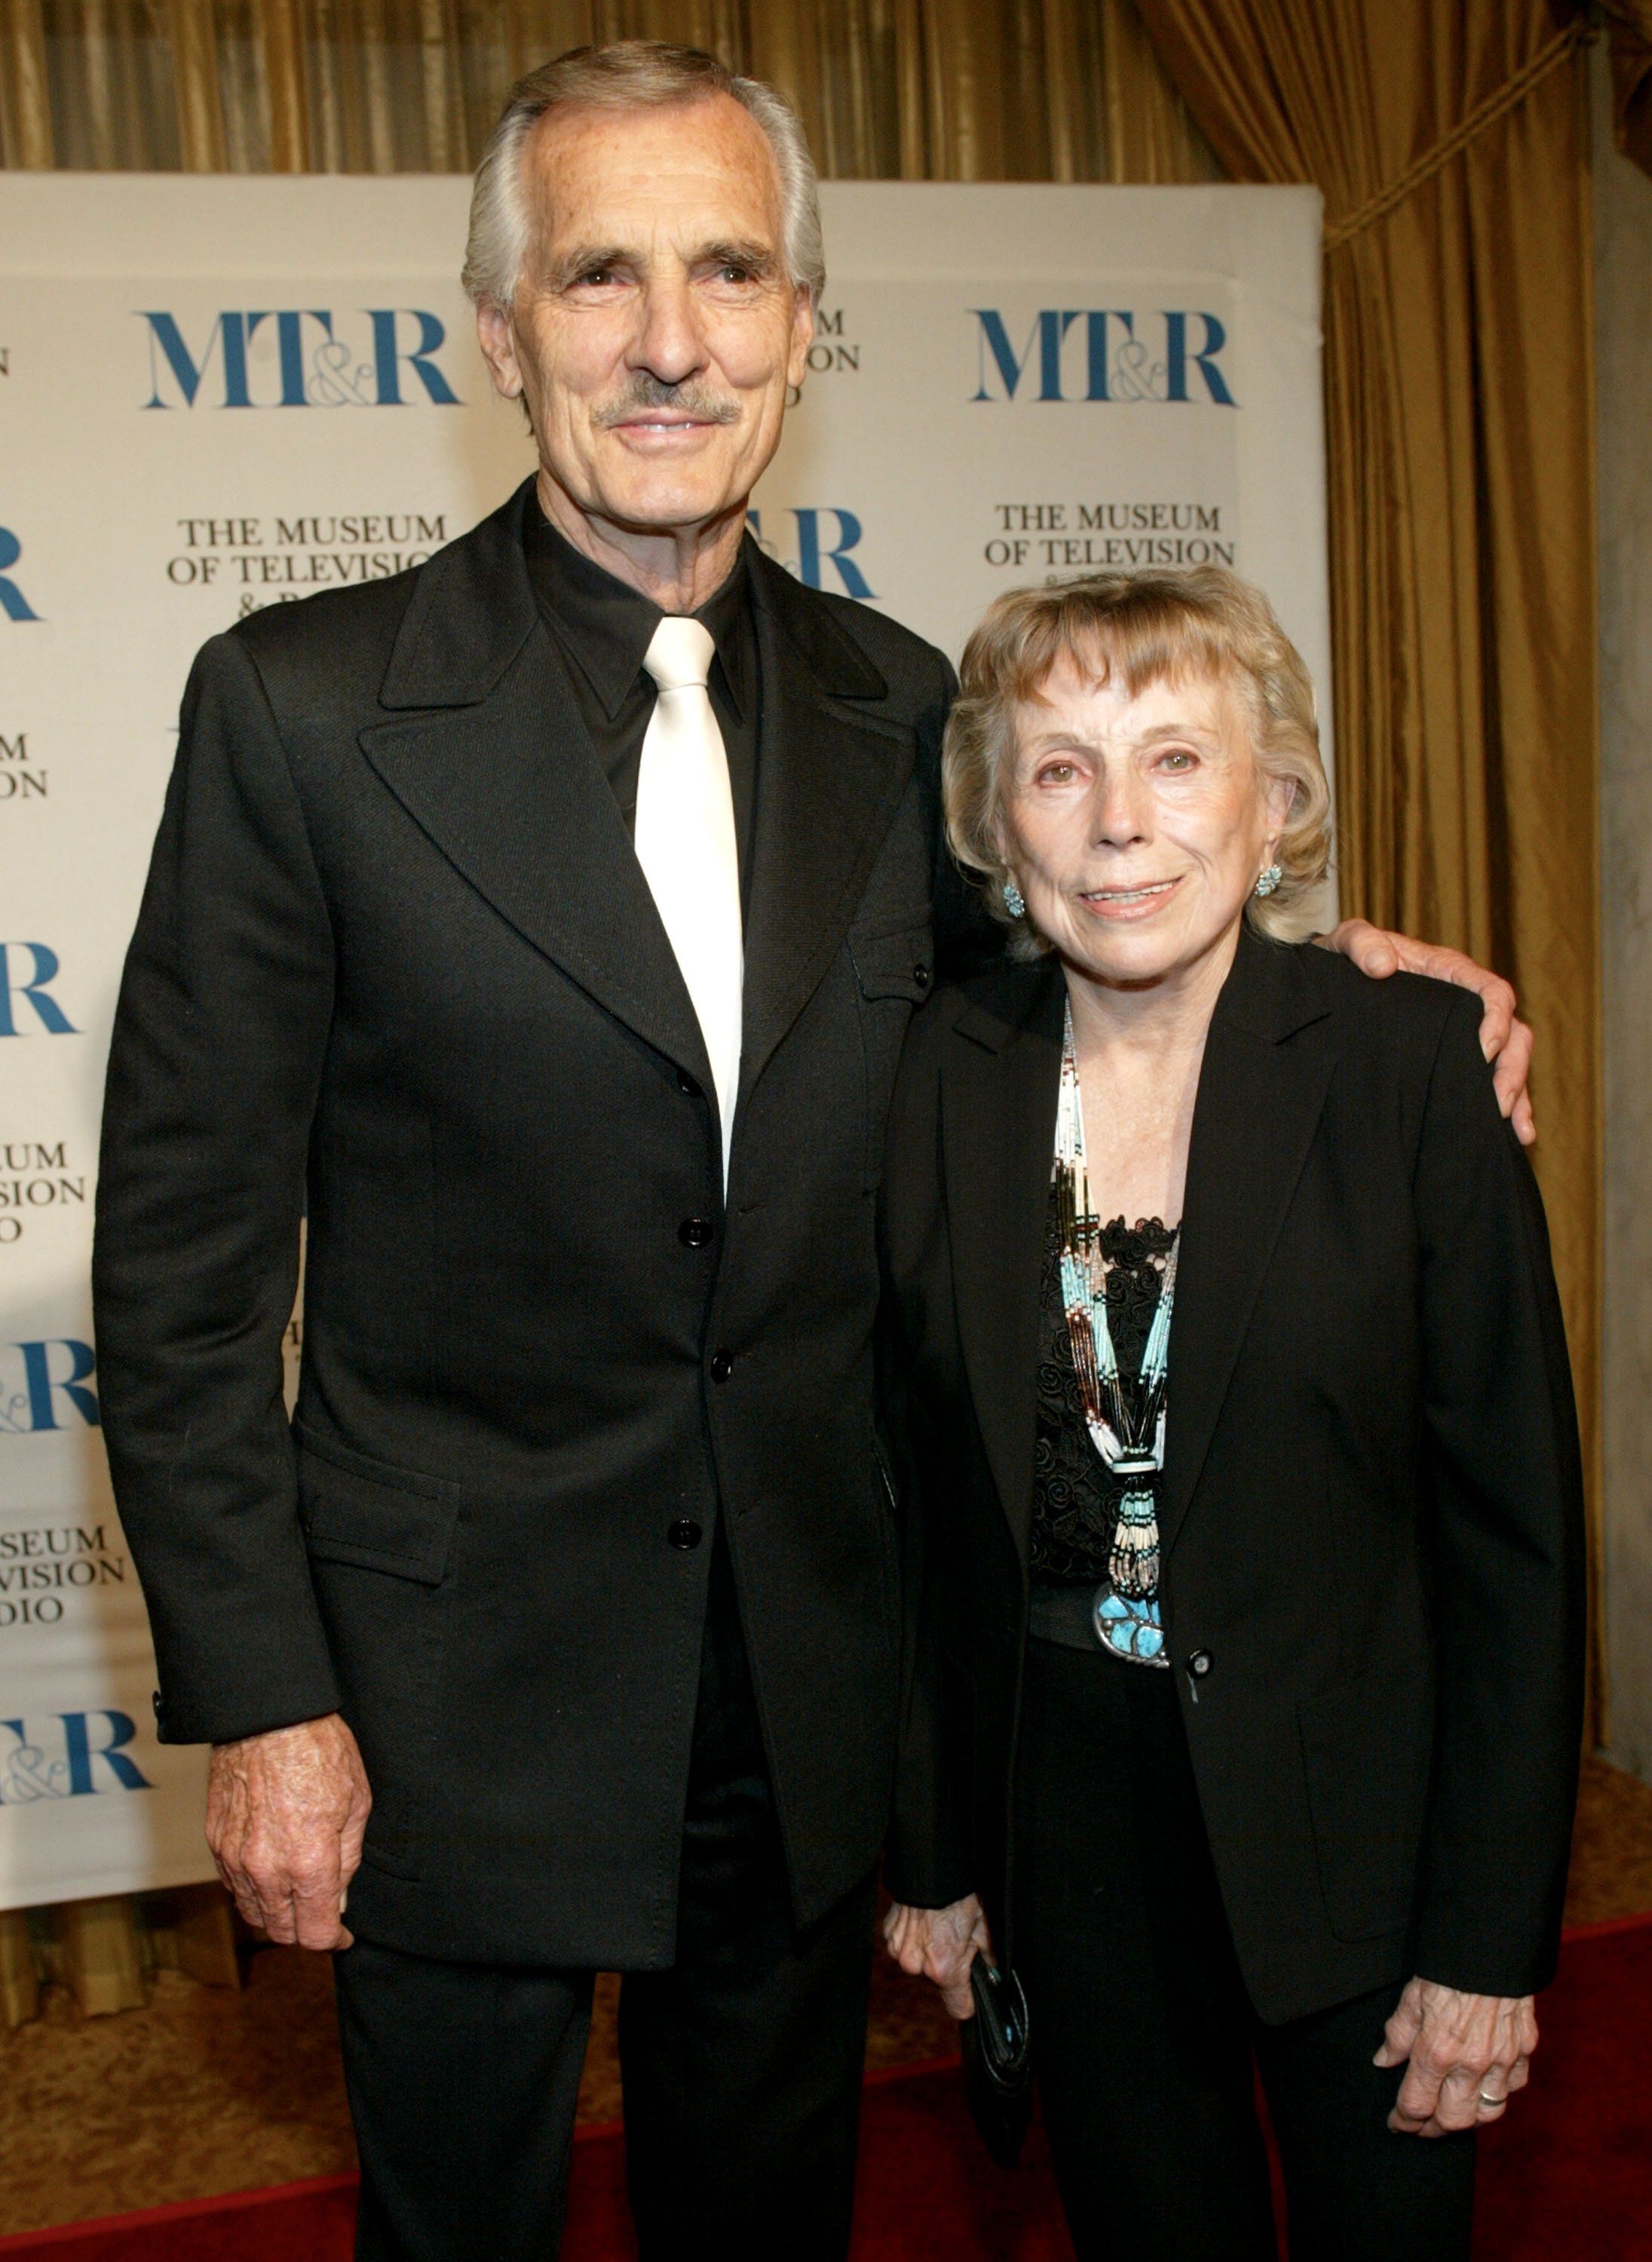 Dennis Weaver and Gerry Stowell attend the Museum of Television & Radio Gala on September 29, 2002 in Beverly Hills, California. / Source: Getty Images